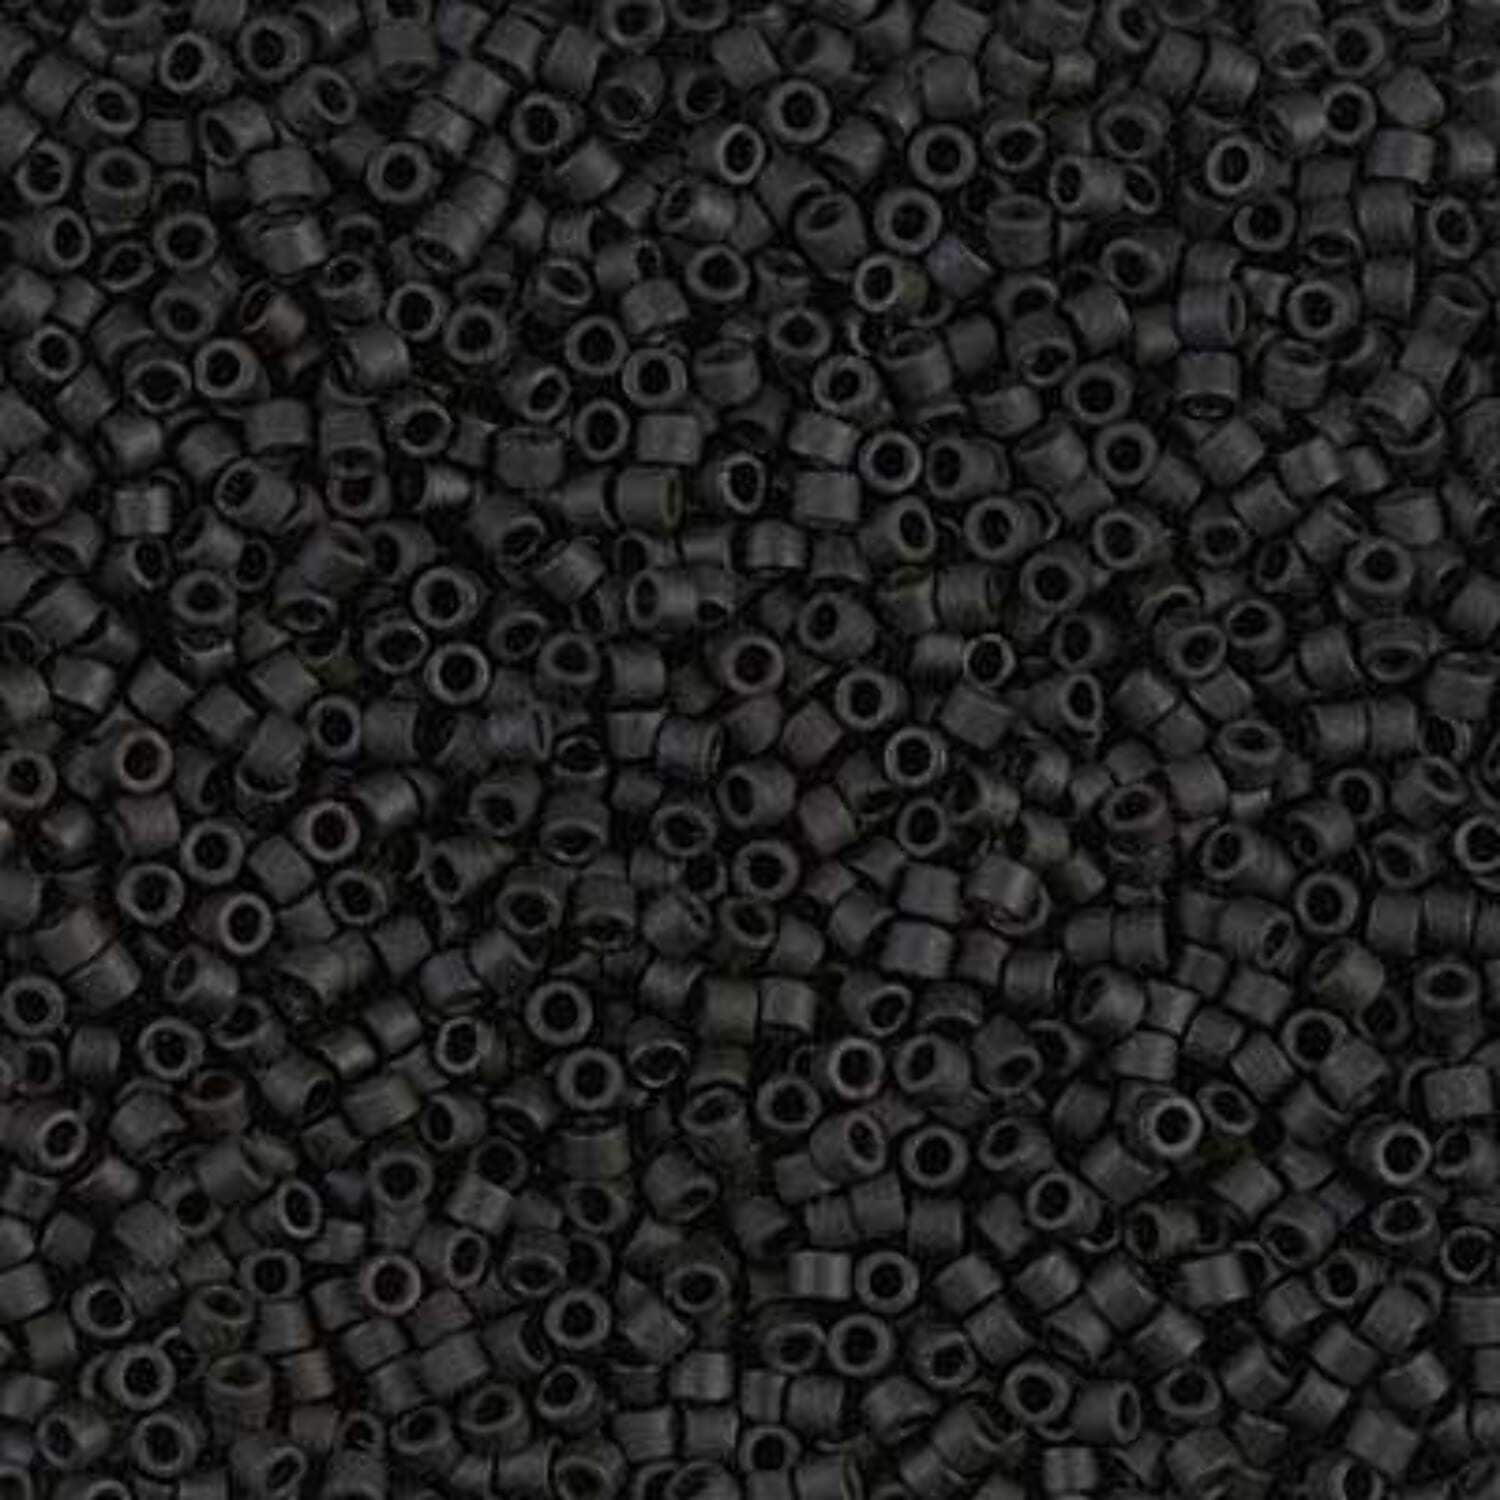 Glass Seed Beads, Black, round - Opaque, Size: about 4mm, hole 1.5mm - 30  grams